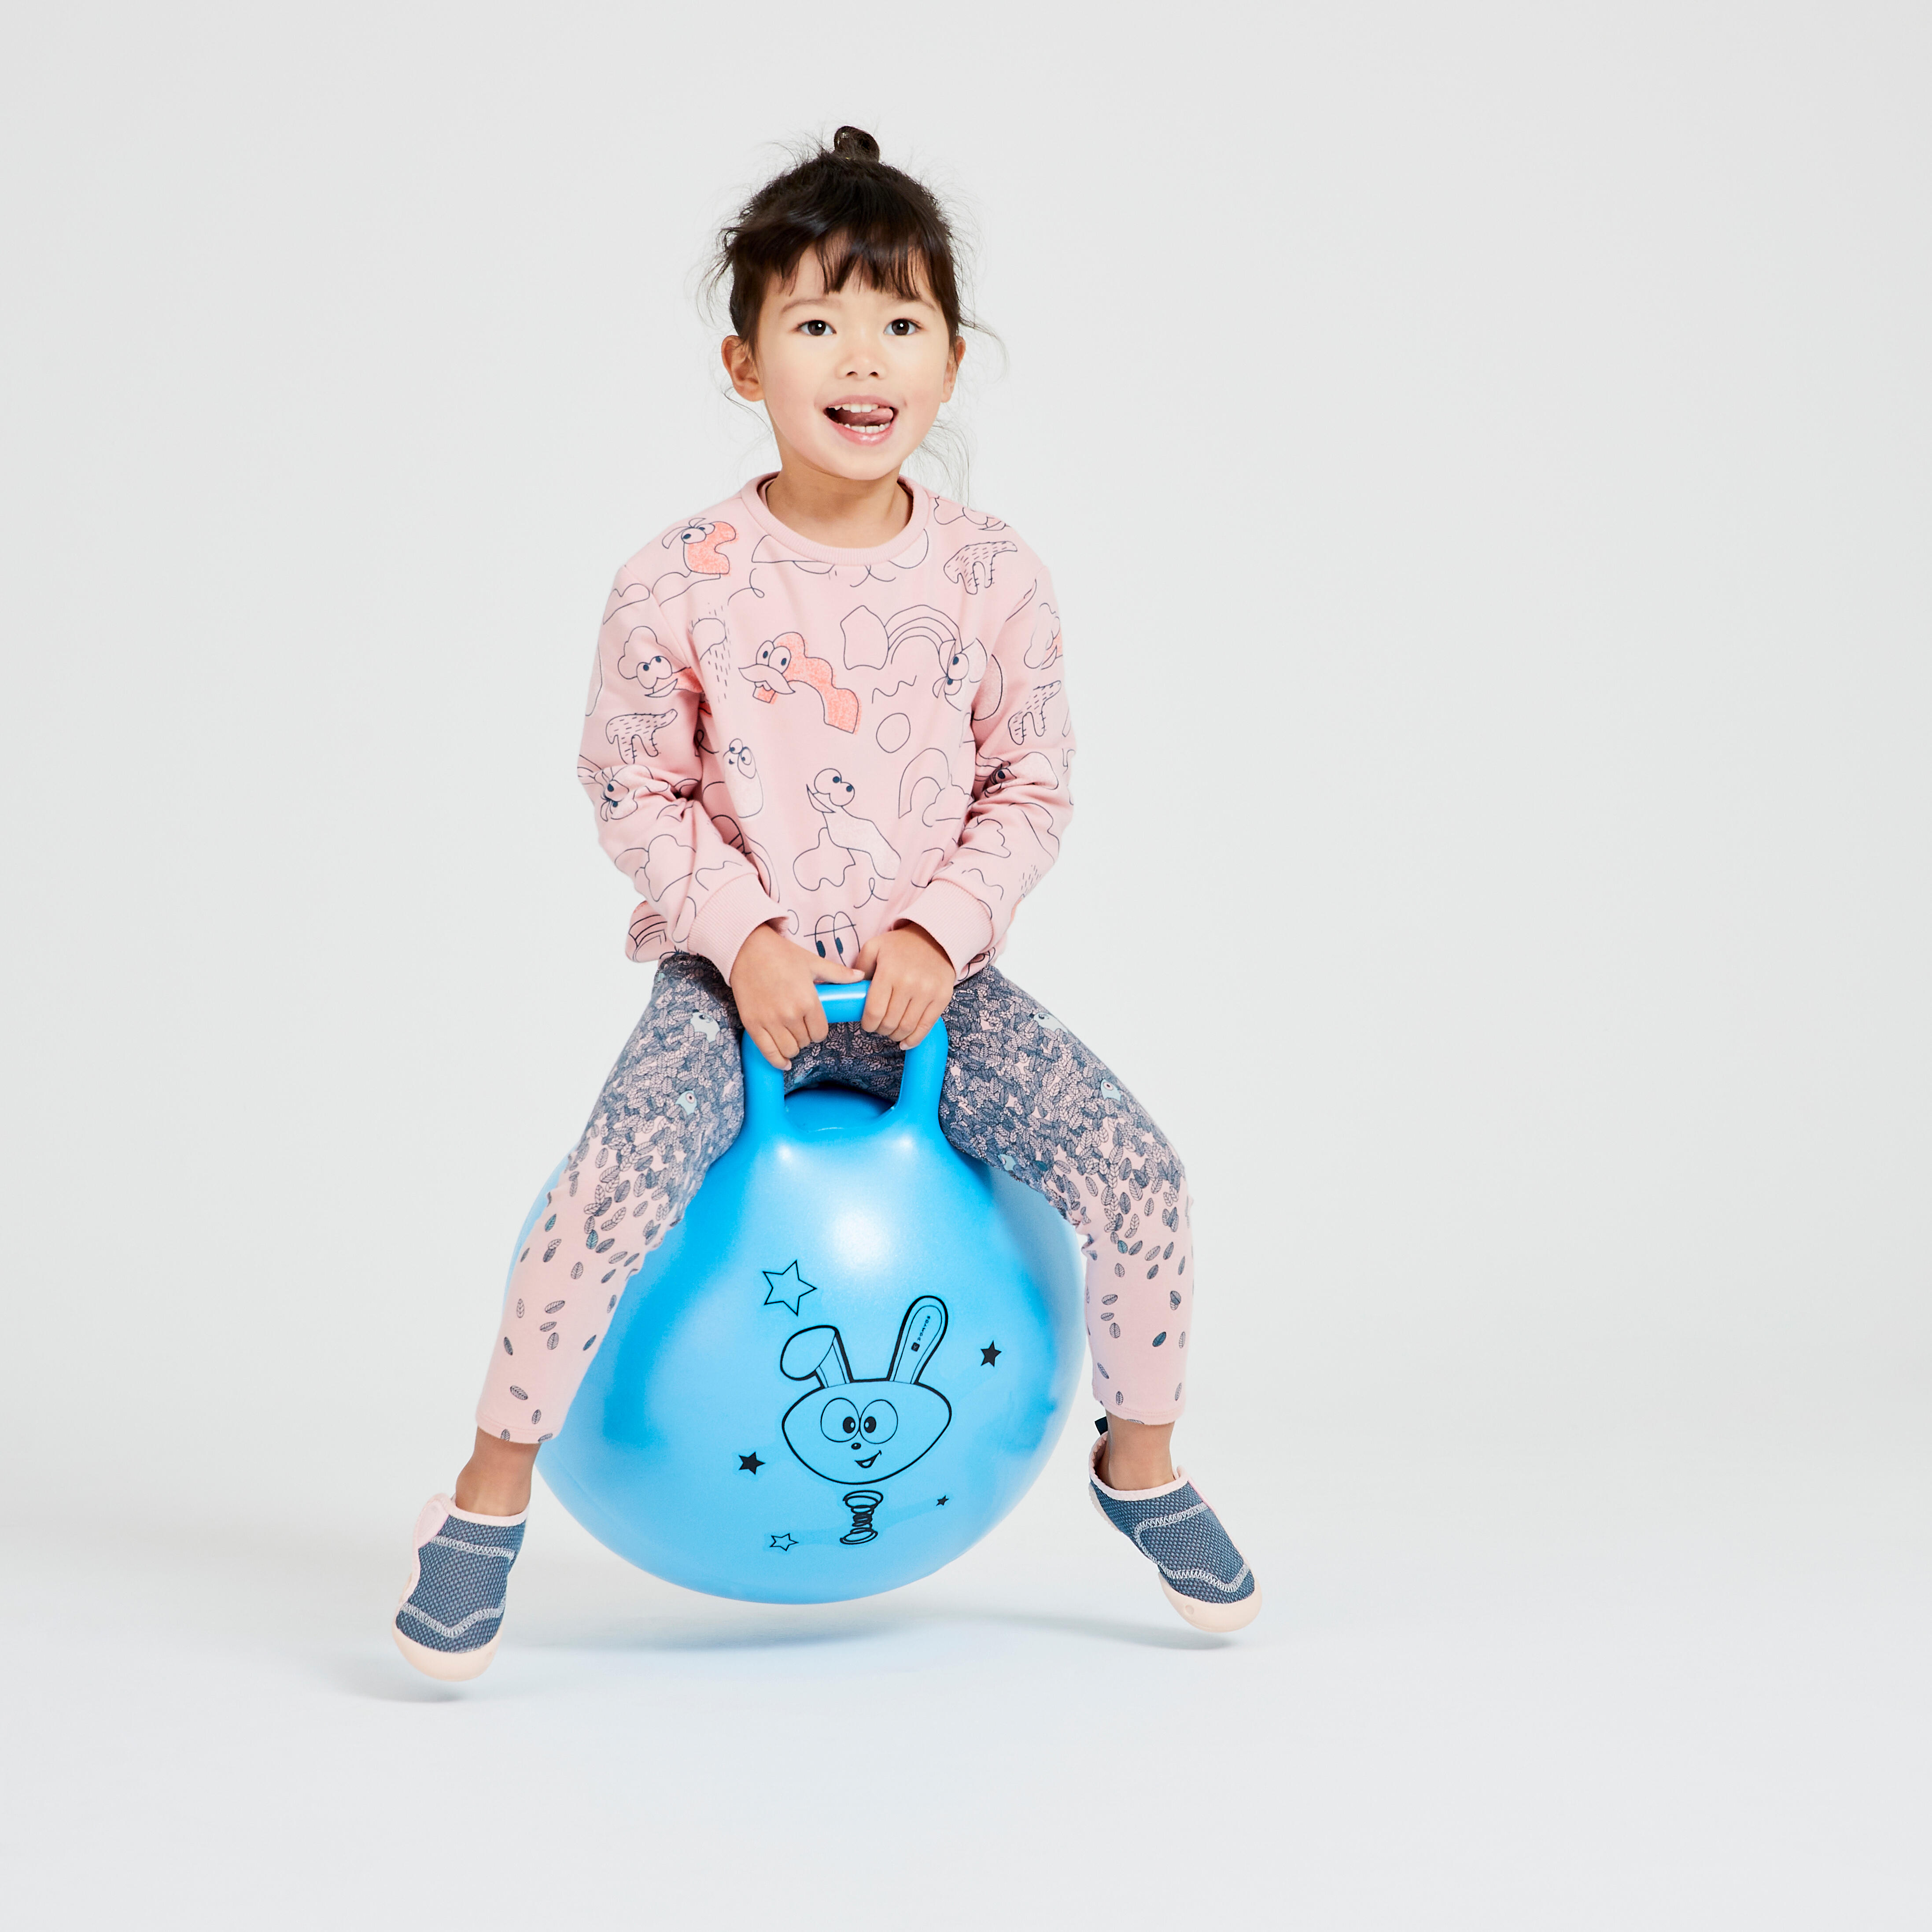 Blue Dog A Great Way for Your Kids to Exercise While Having A Good Time Forest & Twelfth Kids Hopper Ball Incredible Bounce Balls for Indoor or Outdoor Fun for Your Child 